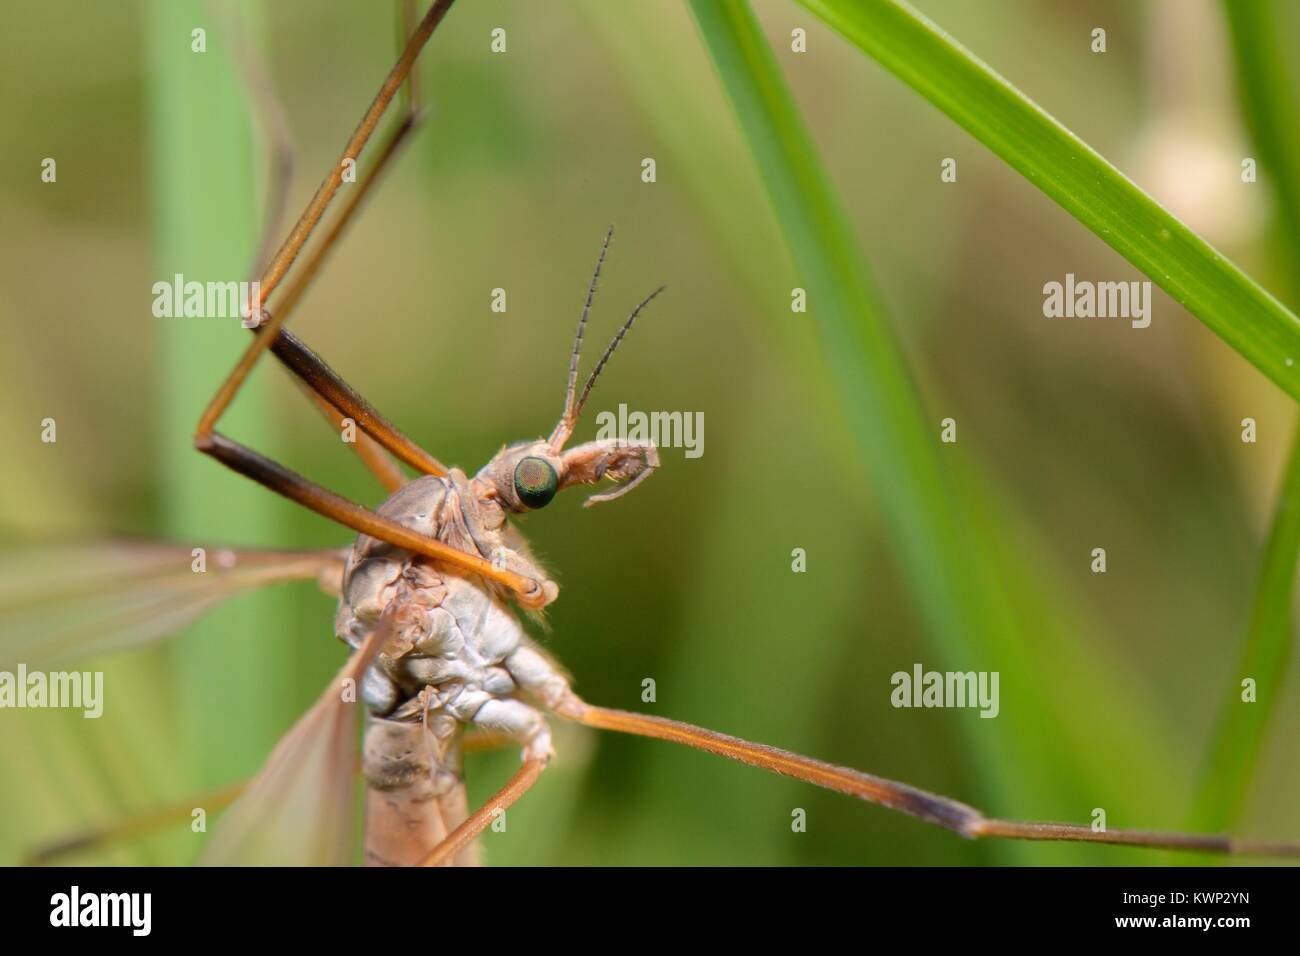 Close up view of Common European Crane fly / Daddy long legs (Tipula paludosa) recently emerged and resting on grass blades in water meadow, UK. Stock Photo